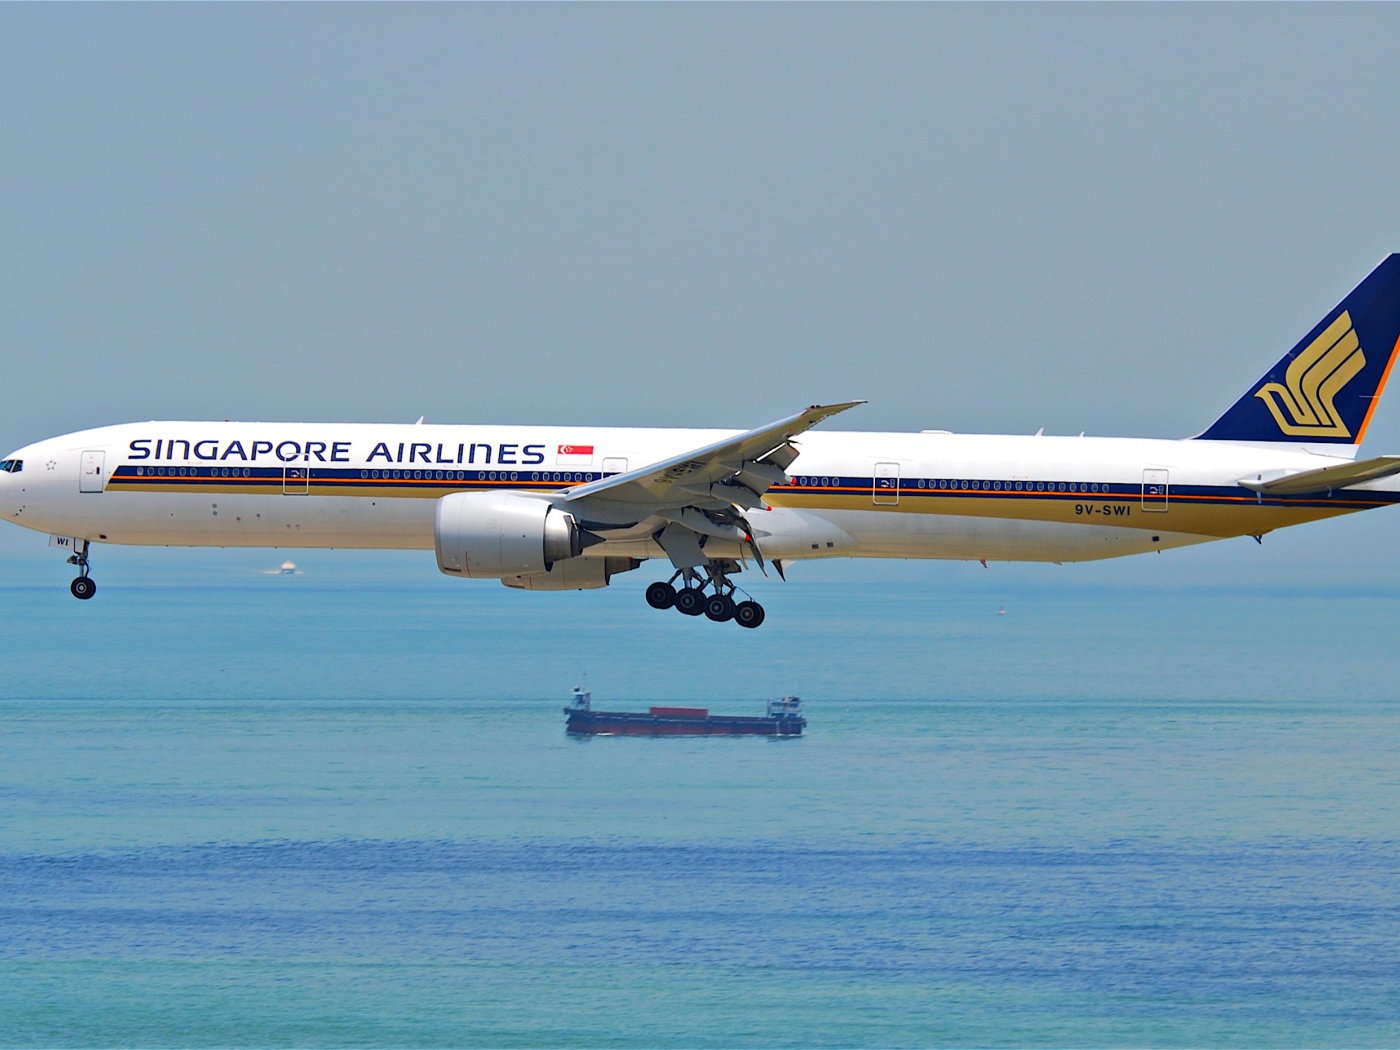 Singapore Airlines Airbus flies over the sea